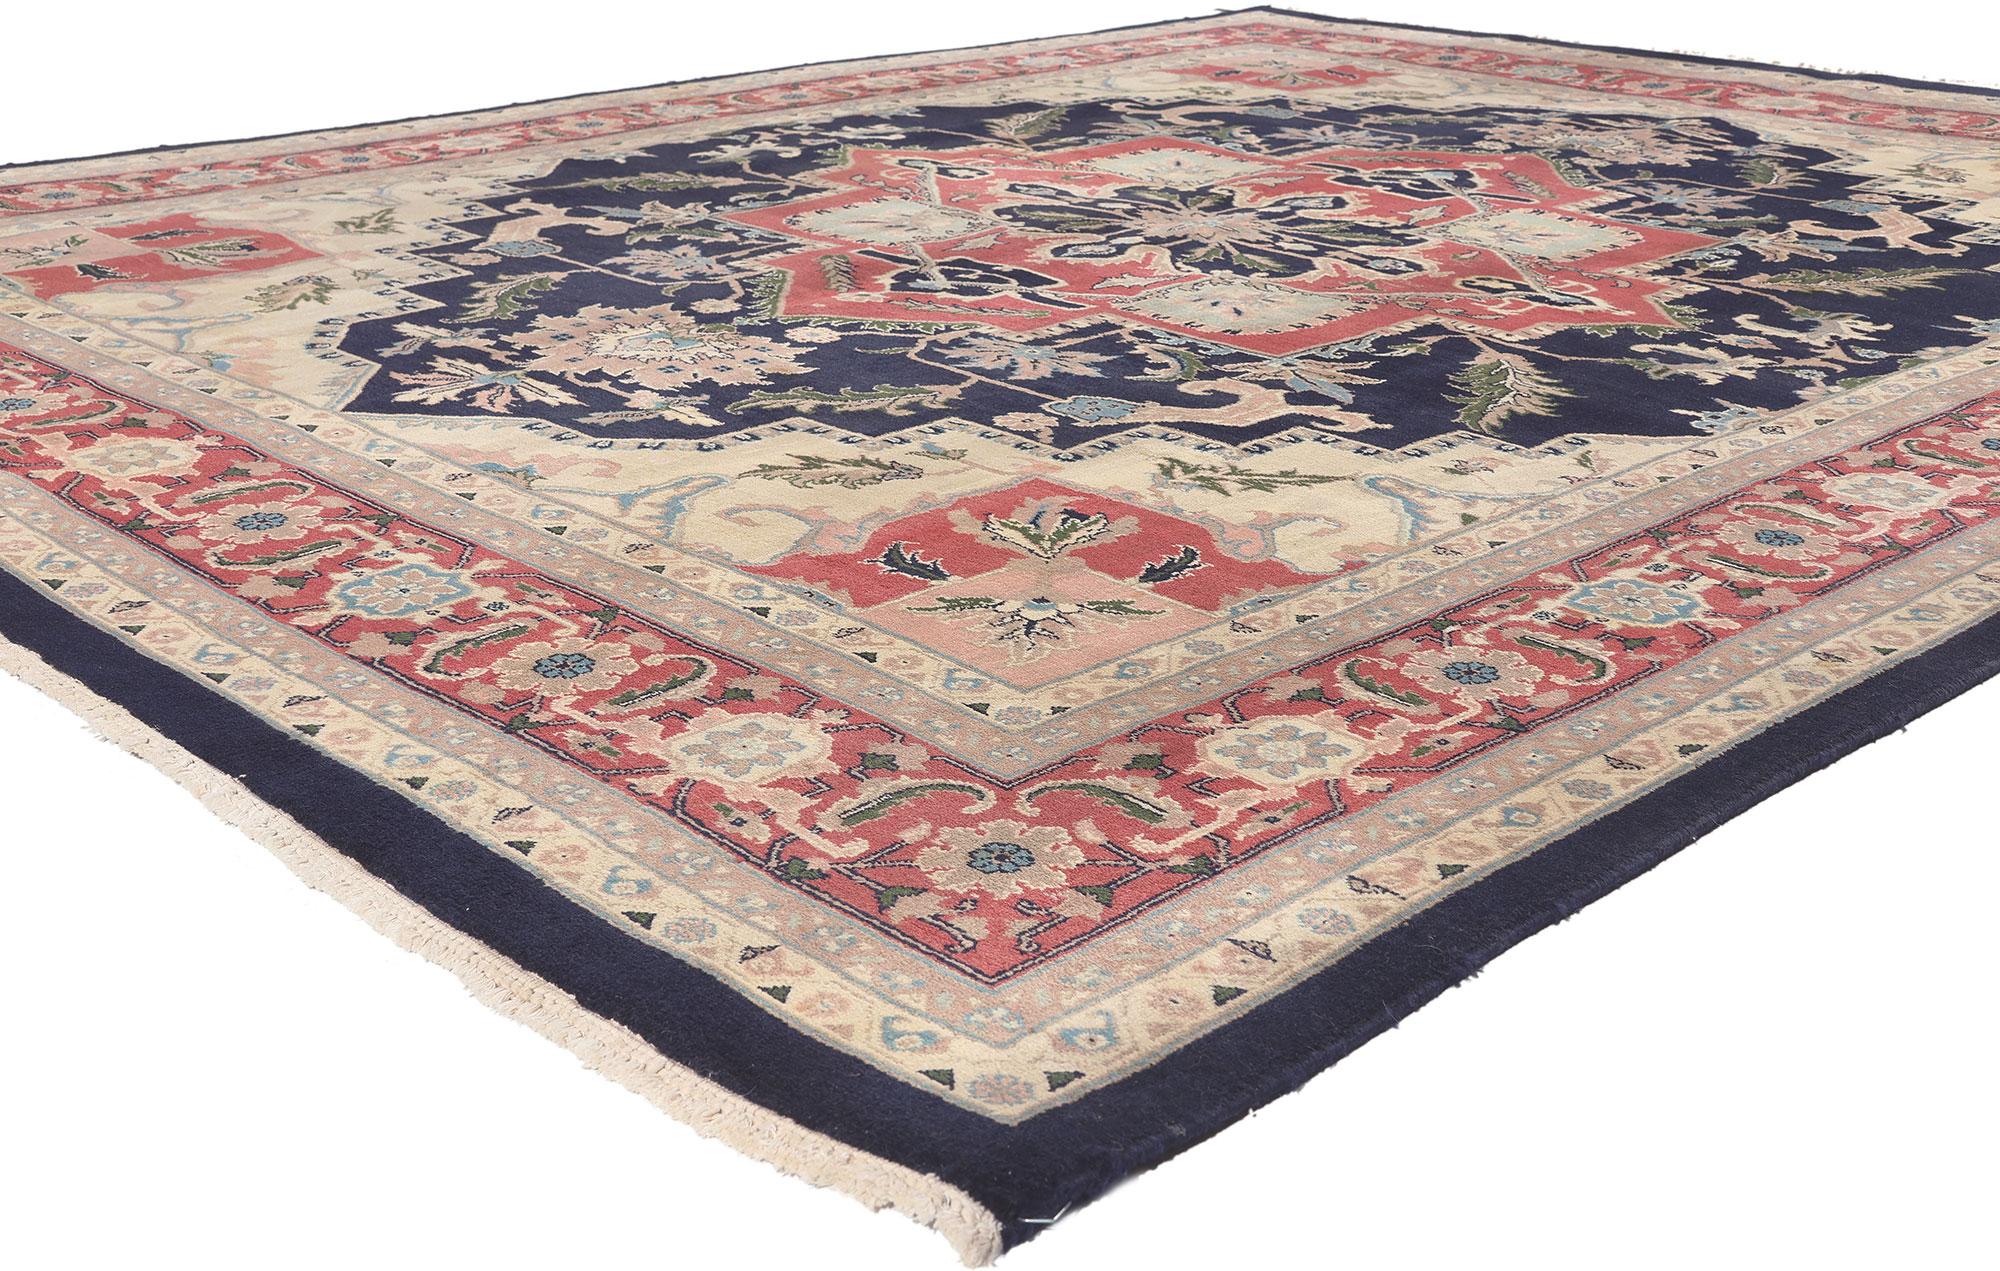 74737 Vintage Pakistani Tabriz Rug, 07’11 x 09’10. Pakistan Tabriz rugs are premium hand-knotted rugs produced in Pakistan, influenced by the traditional Tabriz rugs of Iran. Known for their intricate designs and fine craftsmanship, these rugs